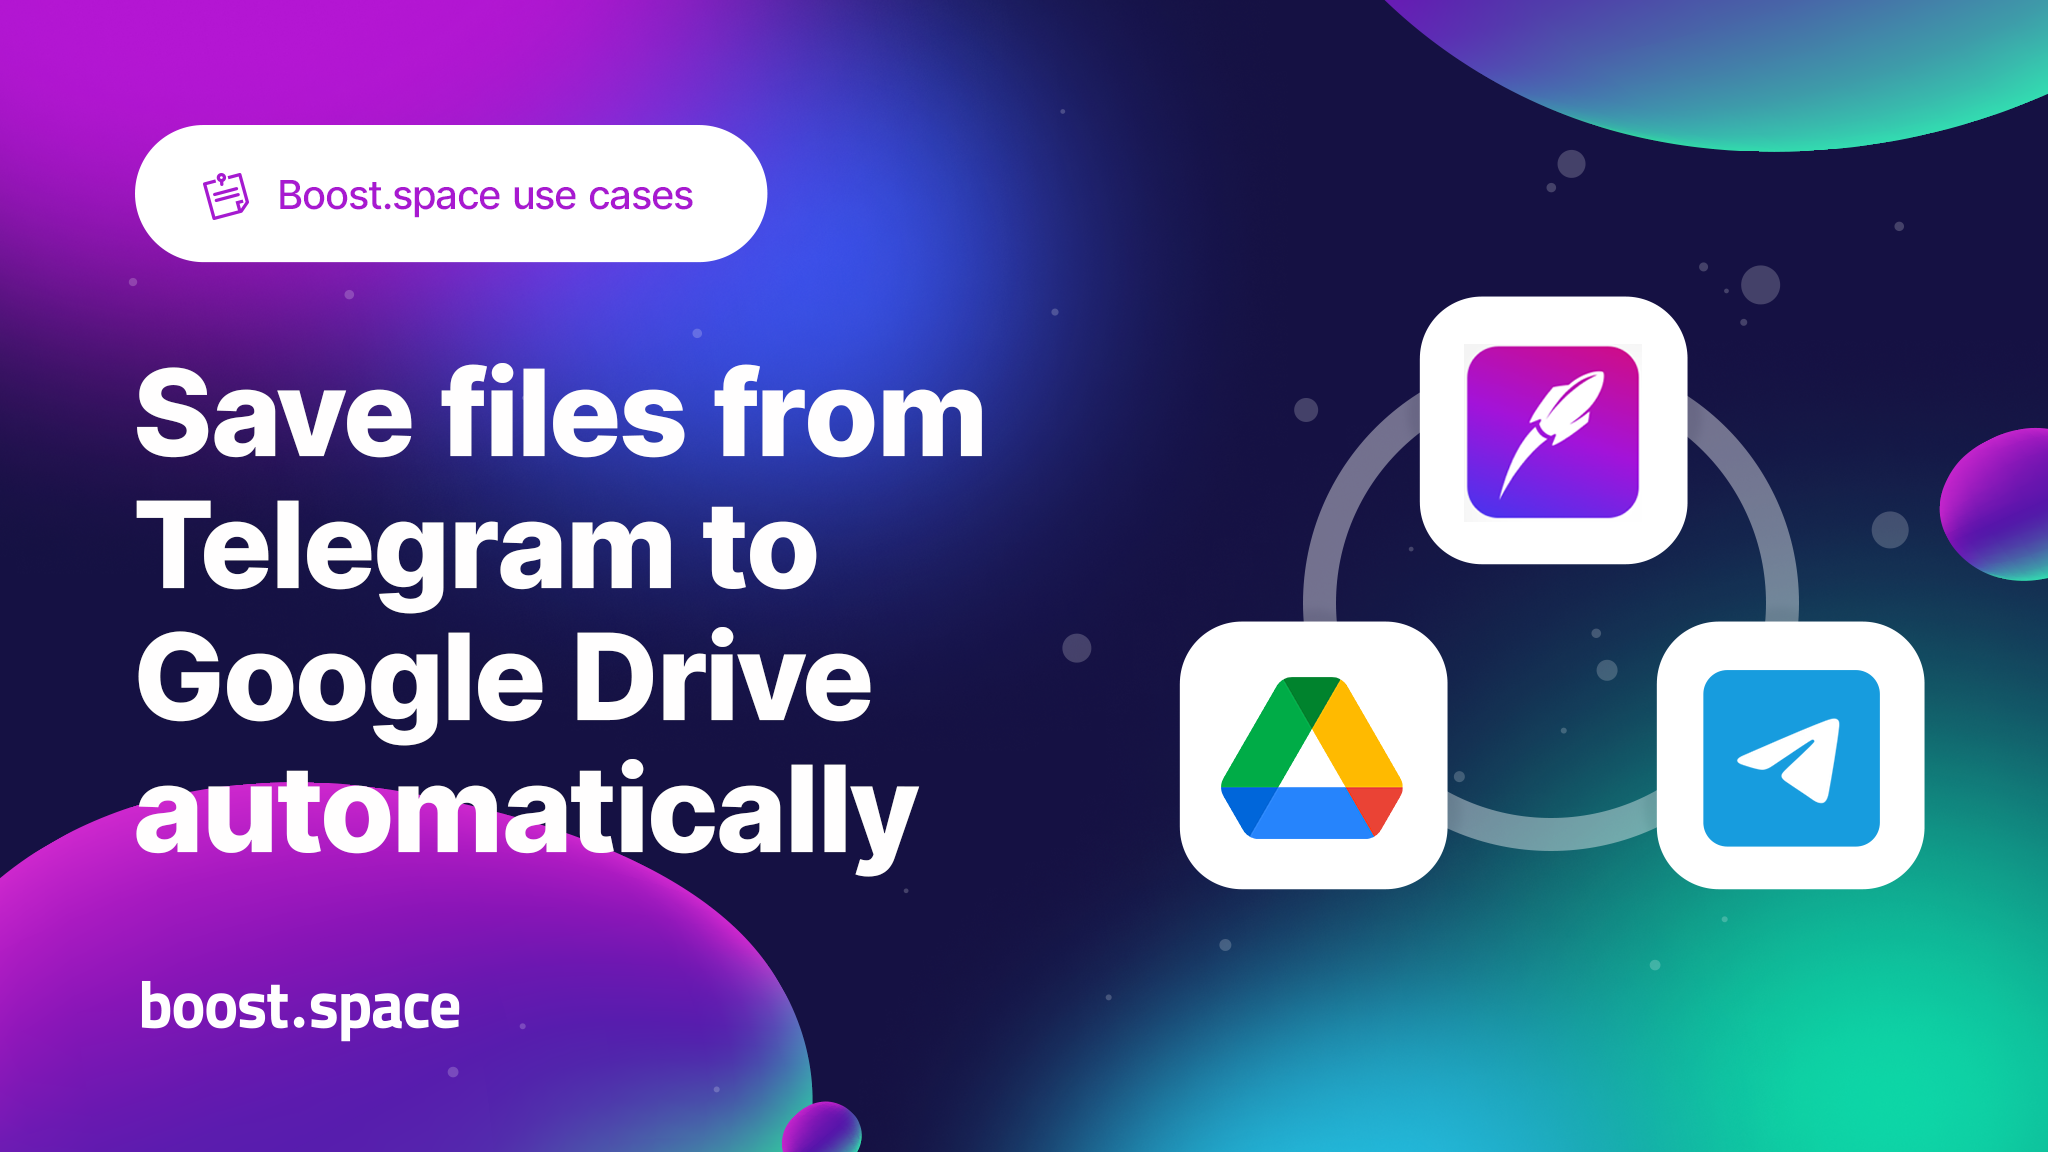 Learn how to save files from Telegram to Google Drive